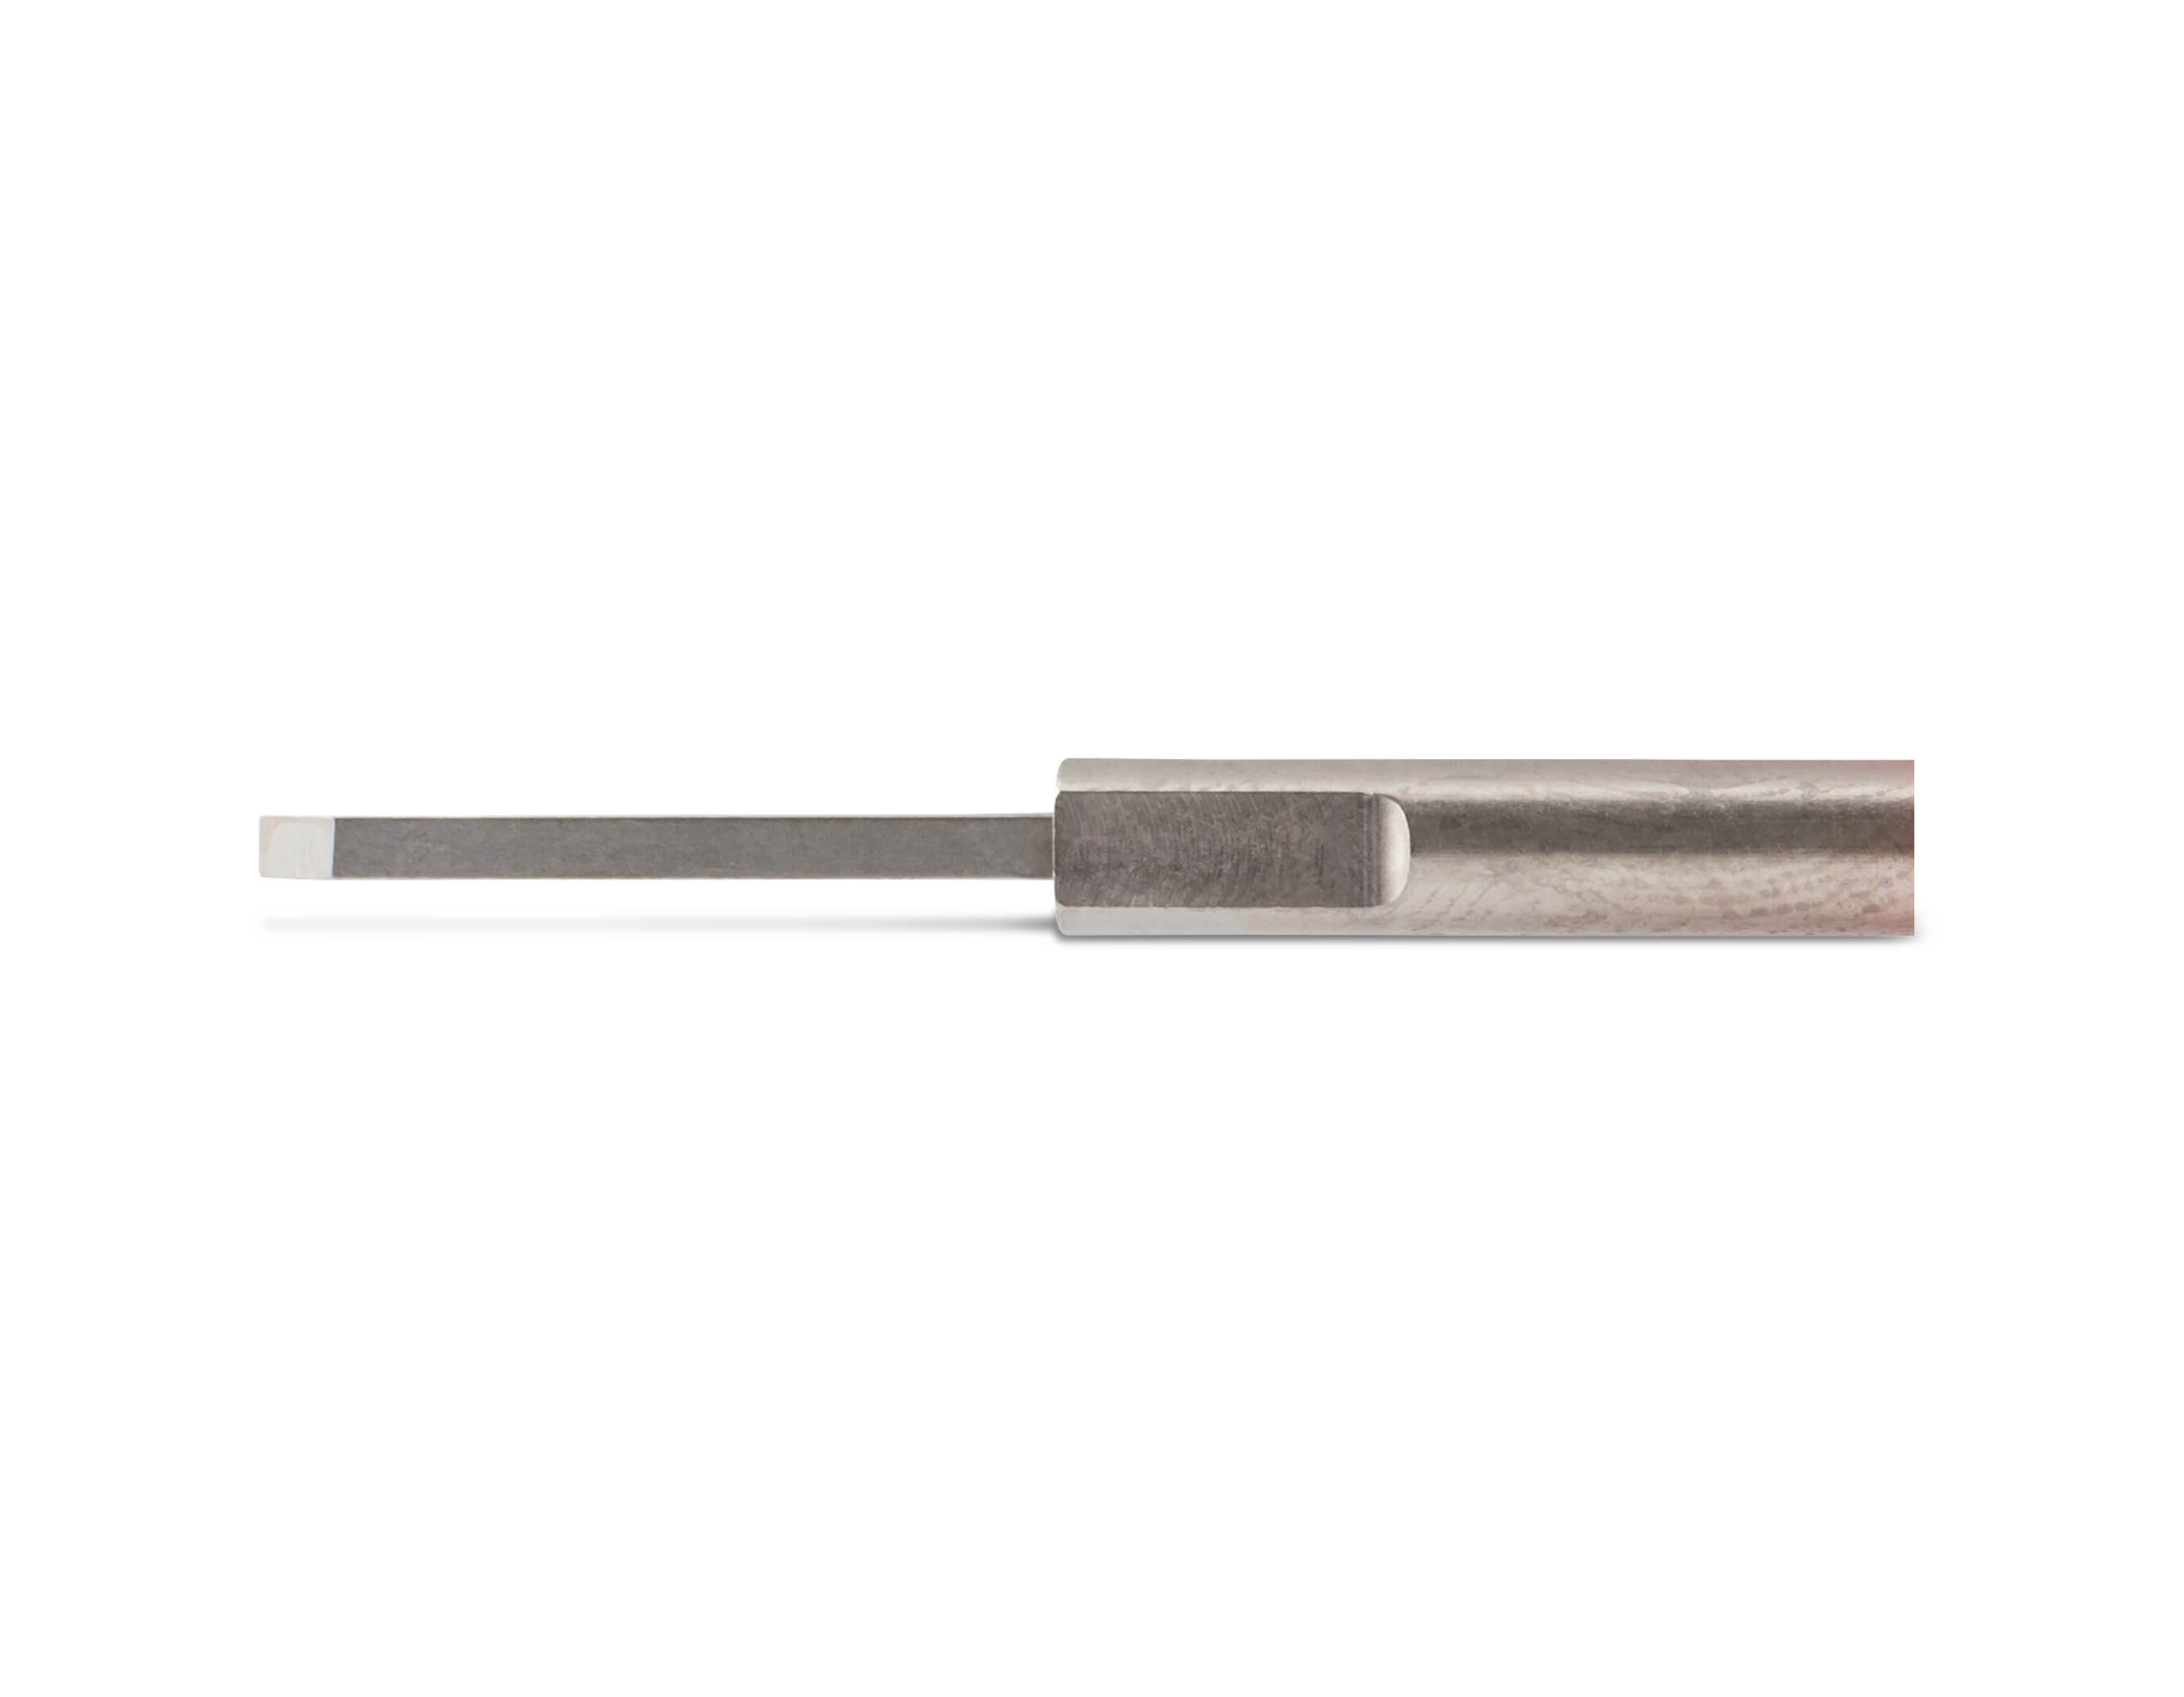 RELEASE TOOL SUPERSEAL SINGLE NOTCH 1.5MM